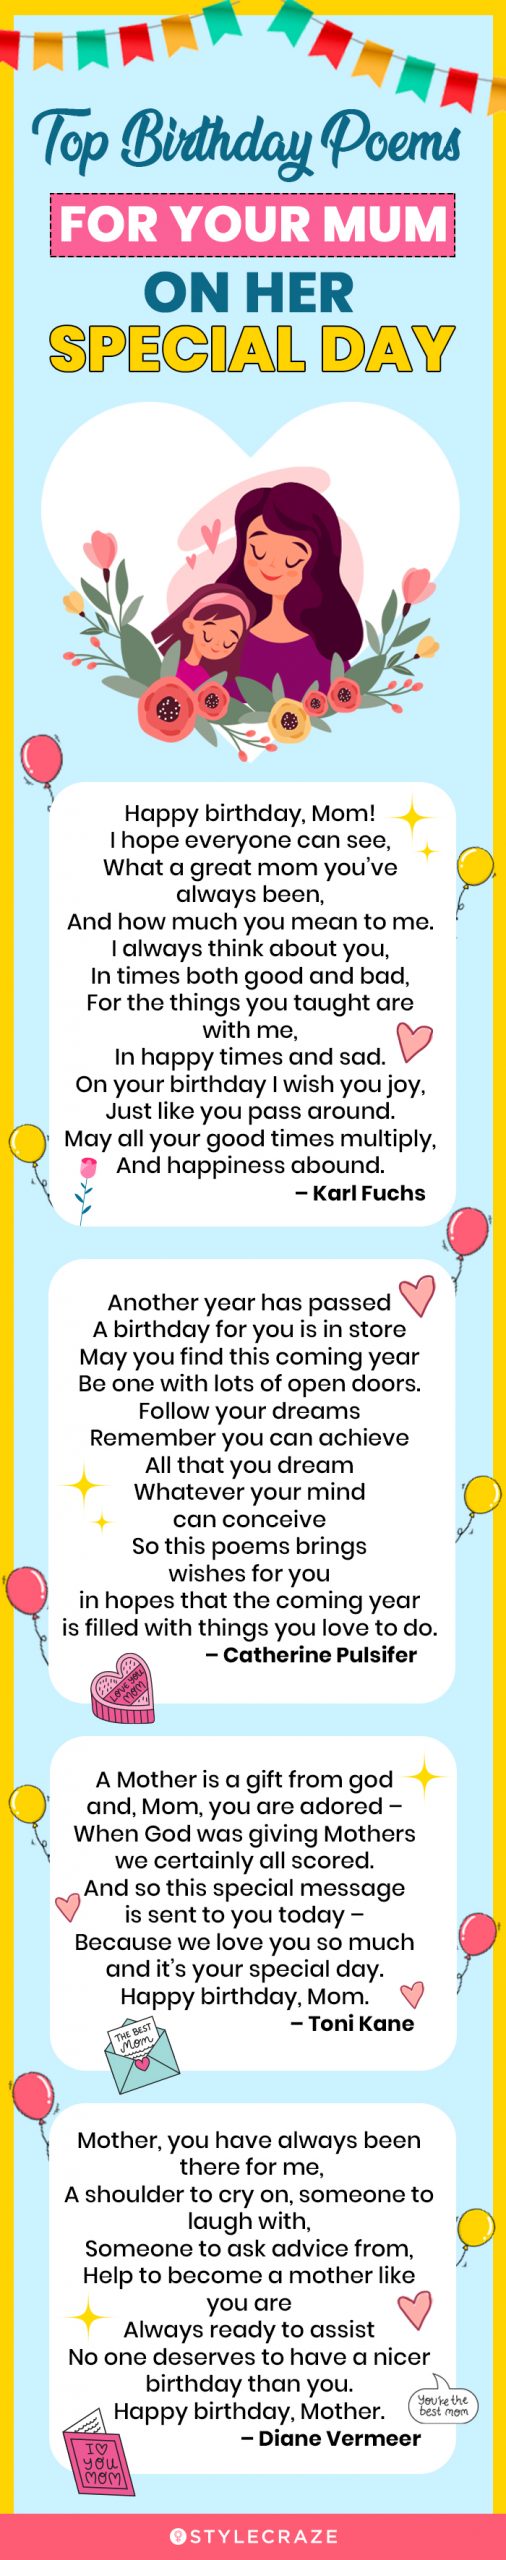 top birthday poems for your mum on her special day (infographic)